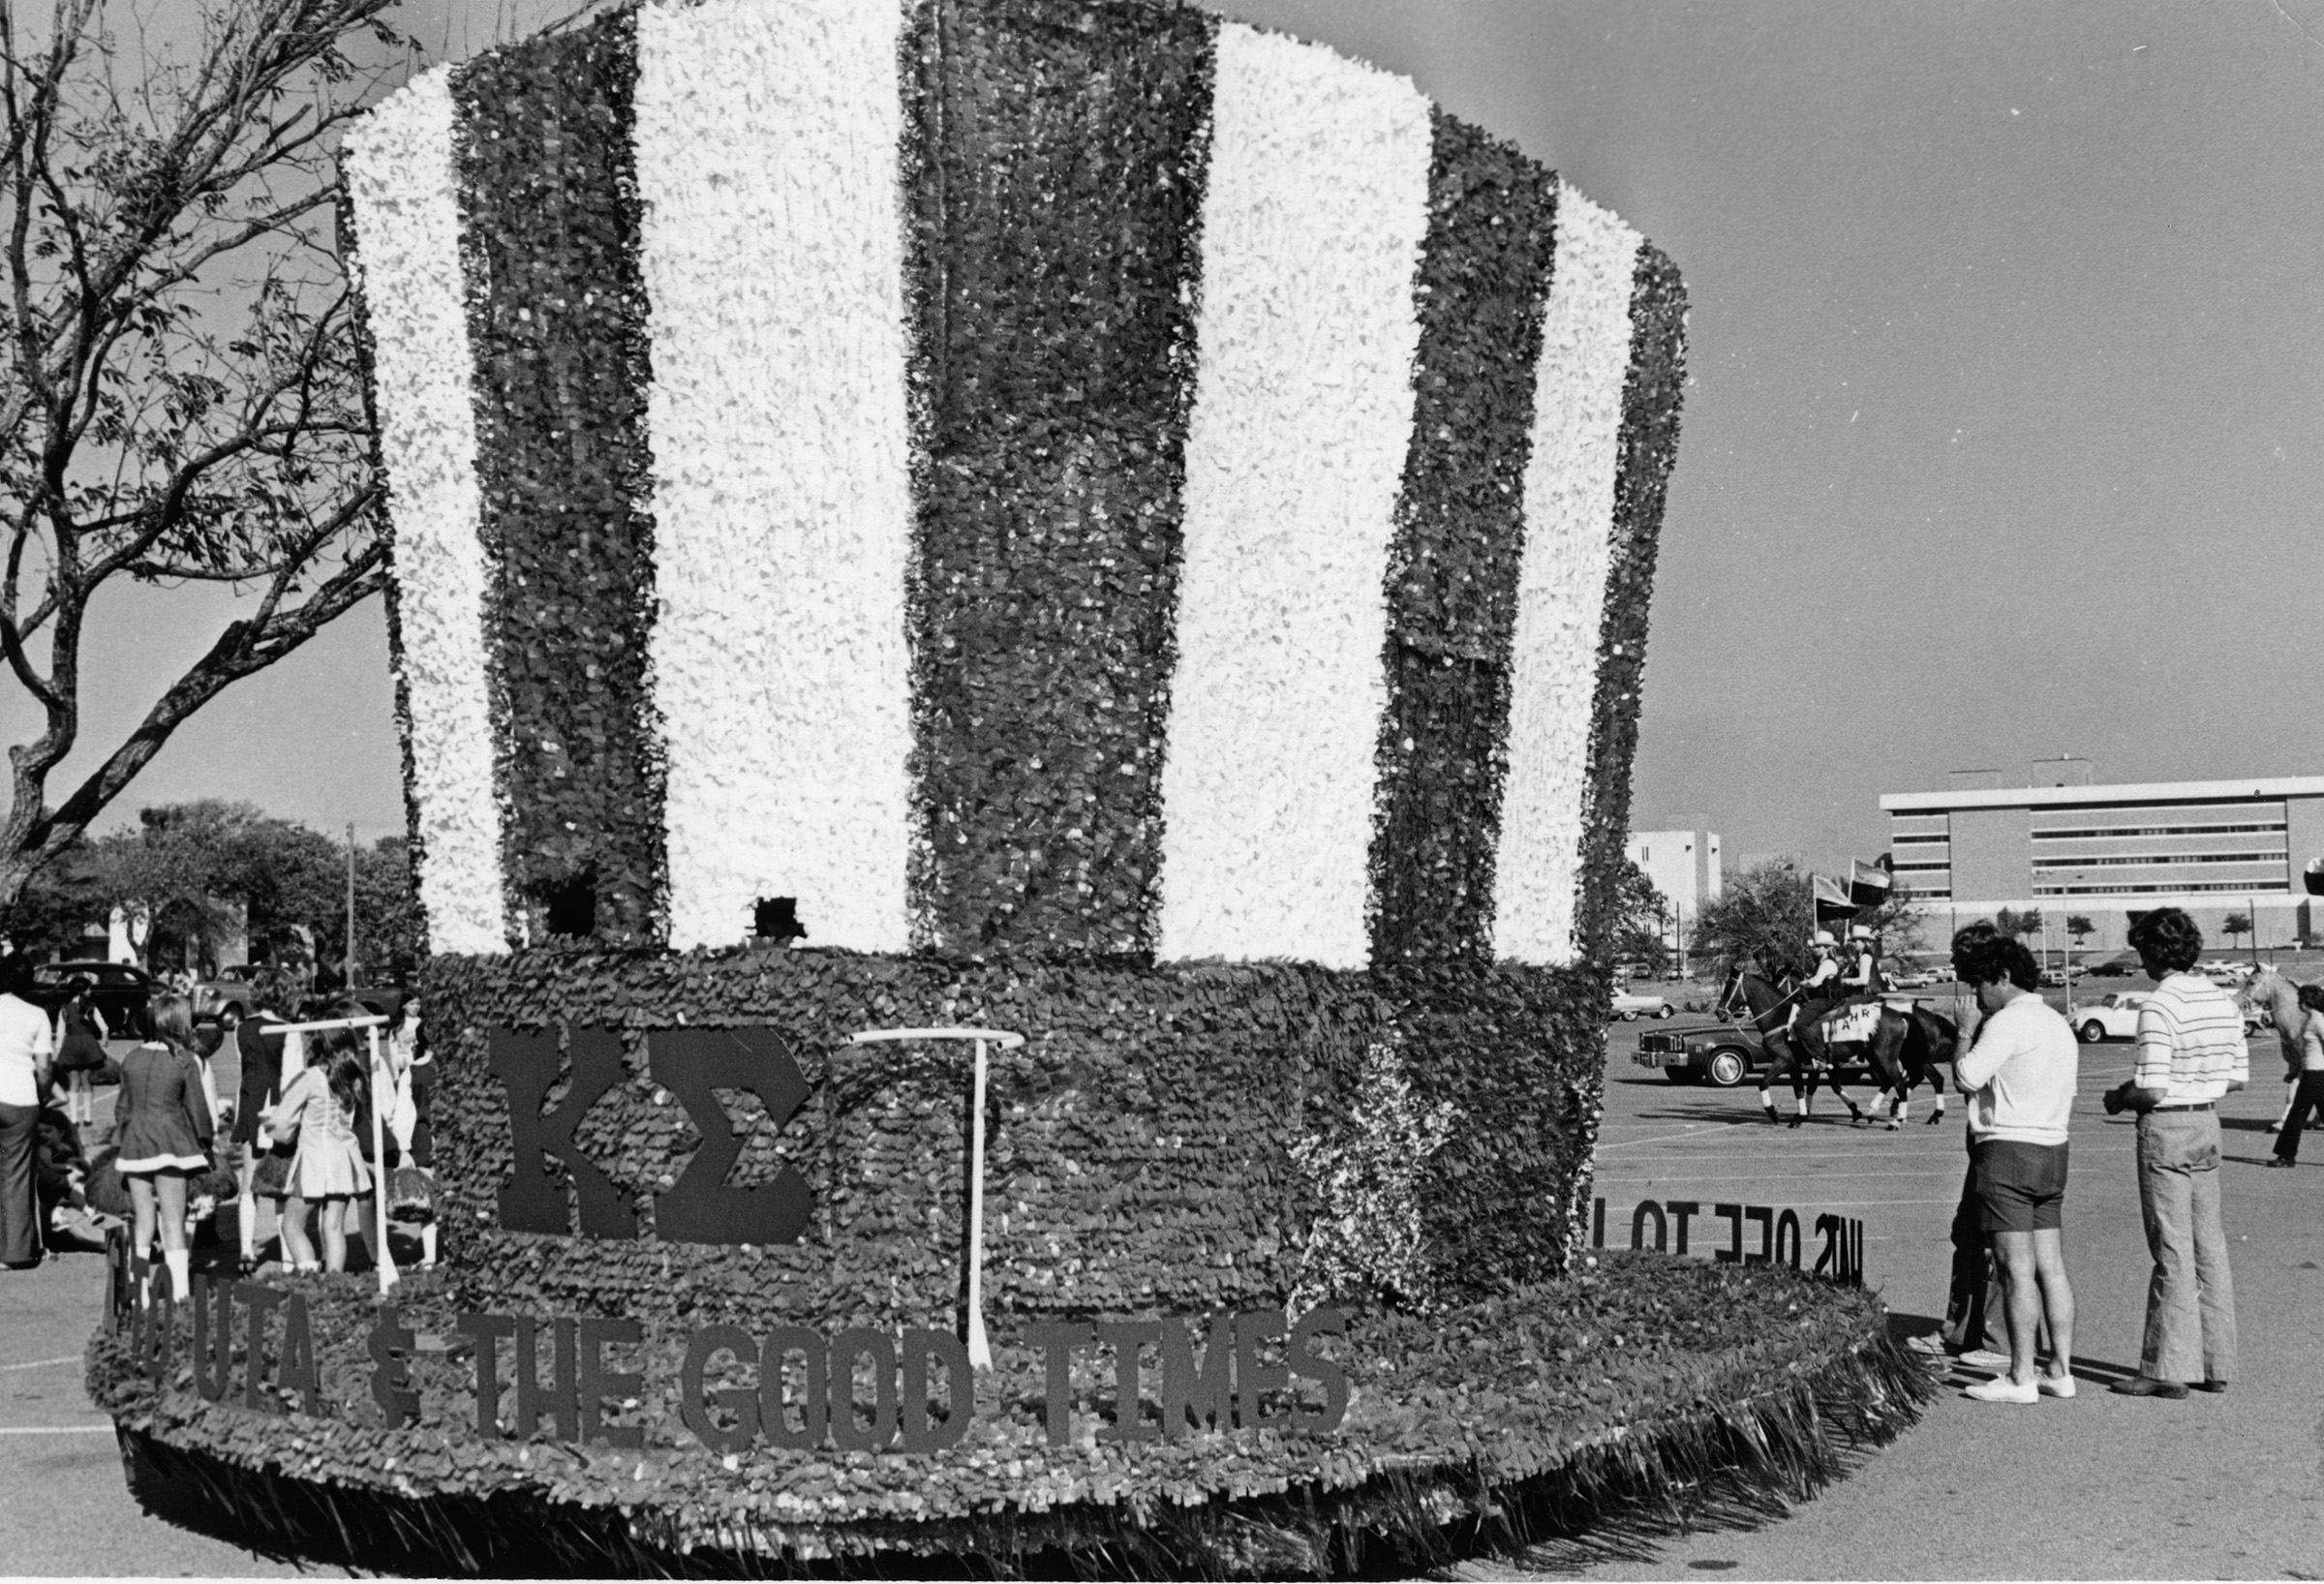 Parade float designed to look like a American flag-style top hat in a parking lot with students, horses, and buildings in the background.